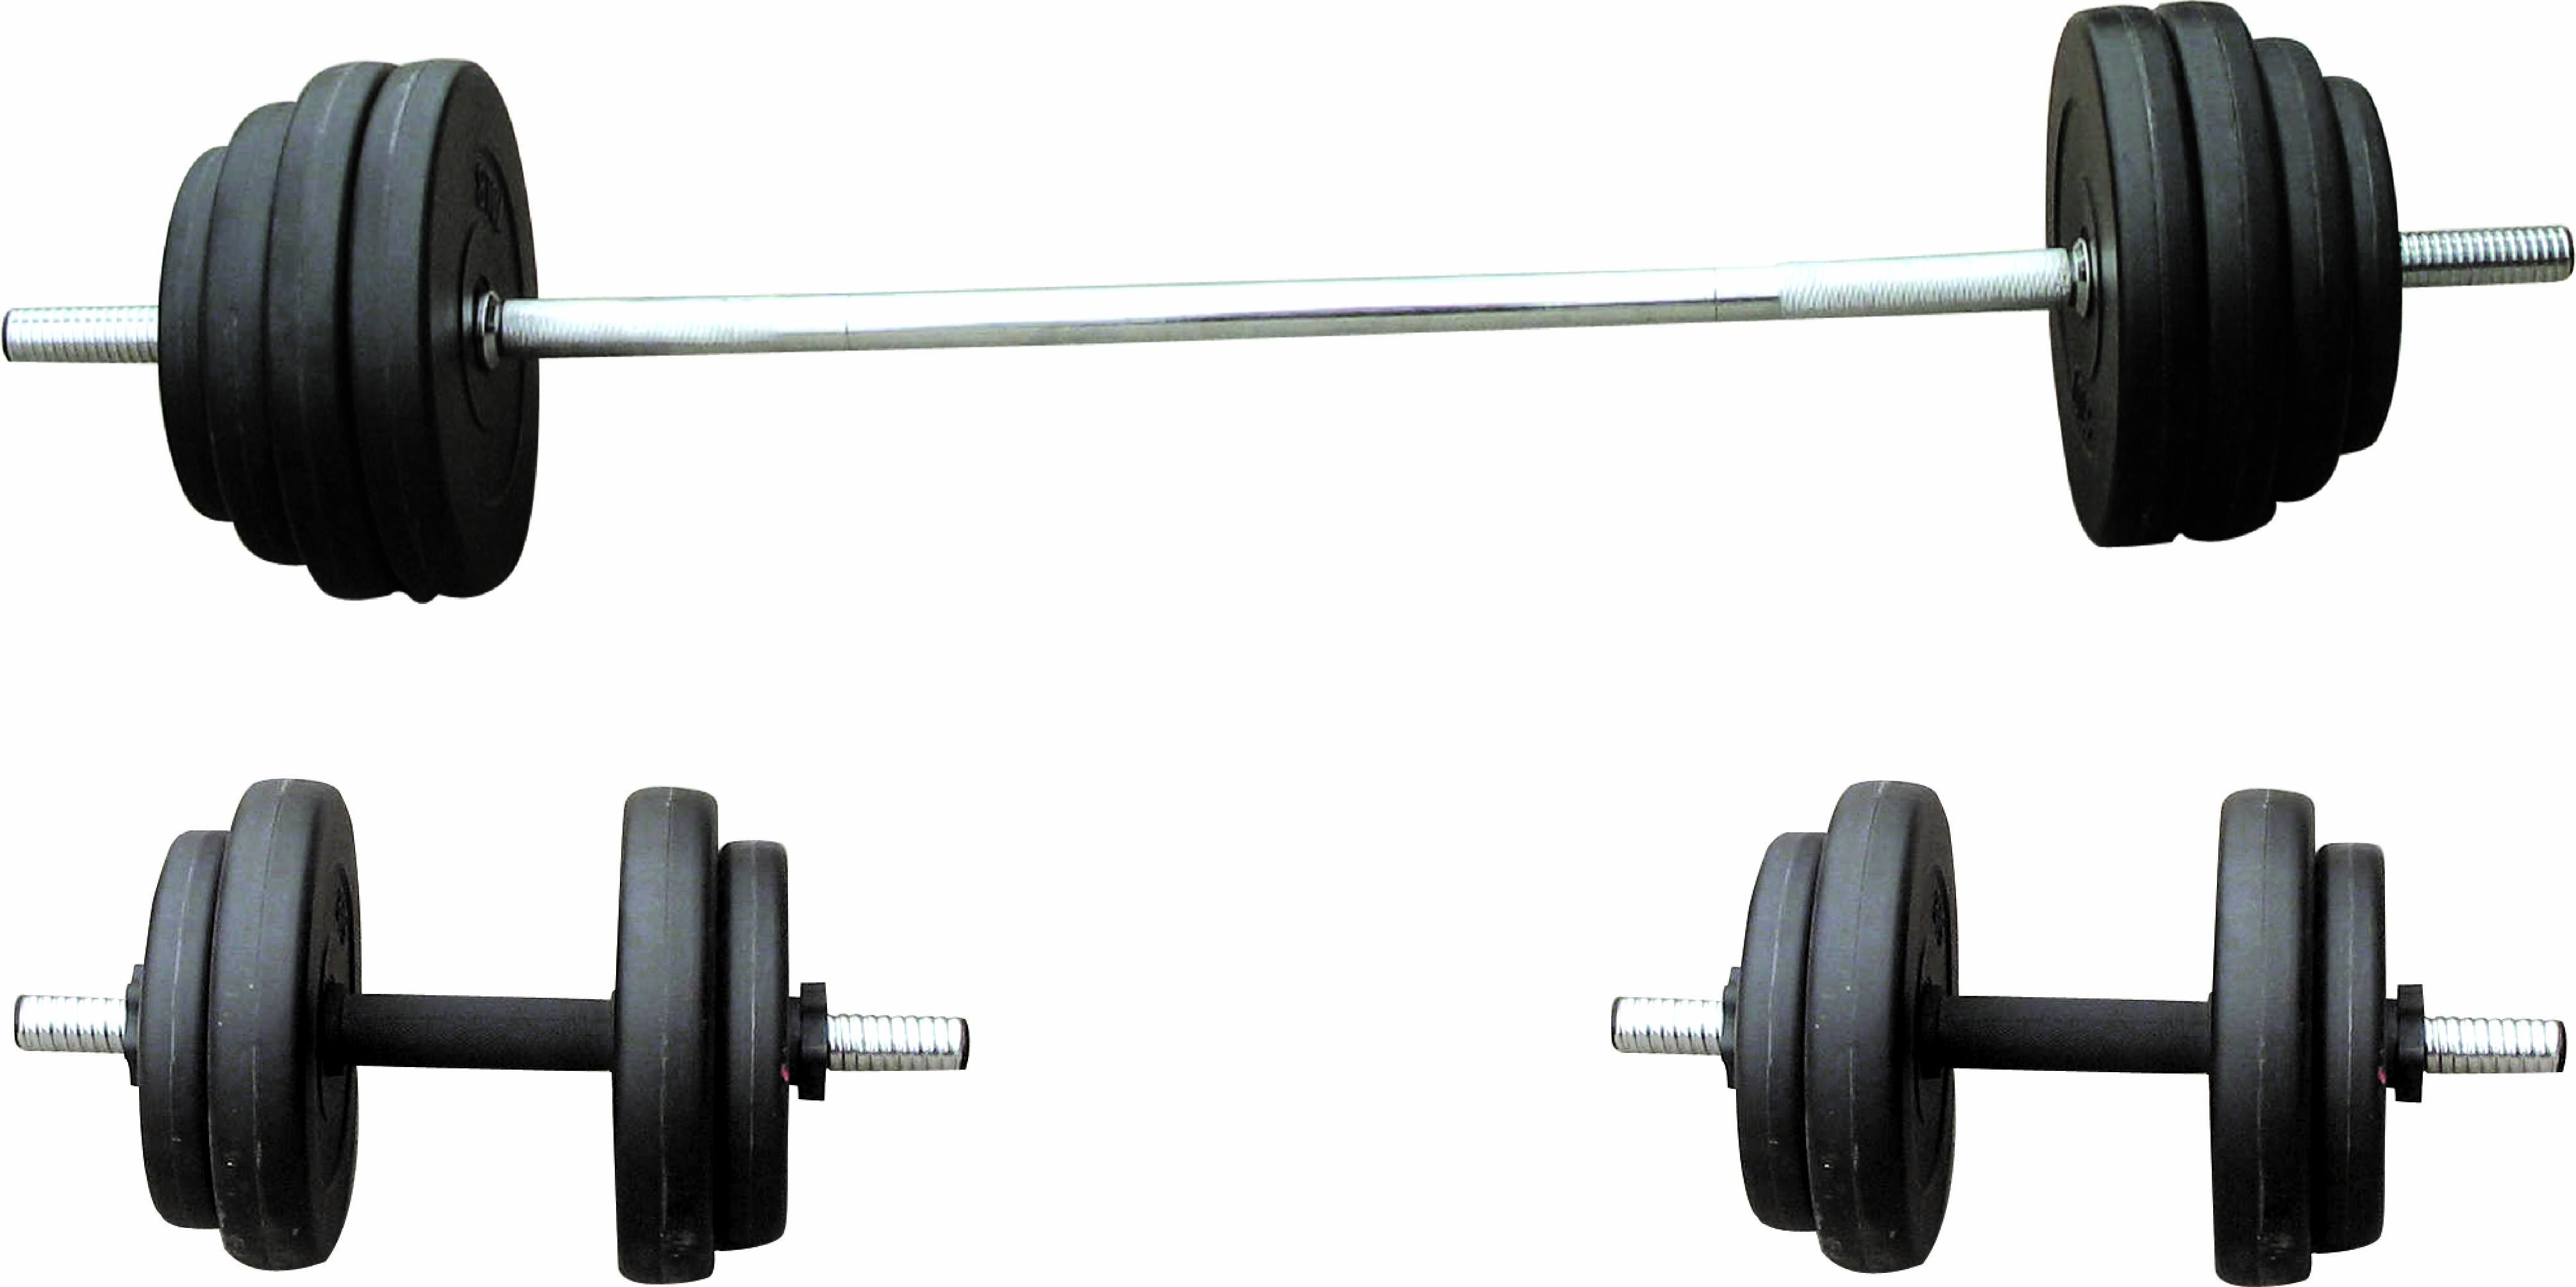 Barbell Images - Clipart library